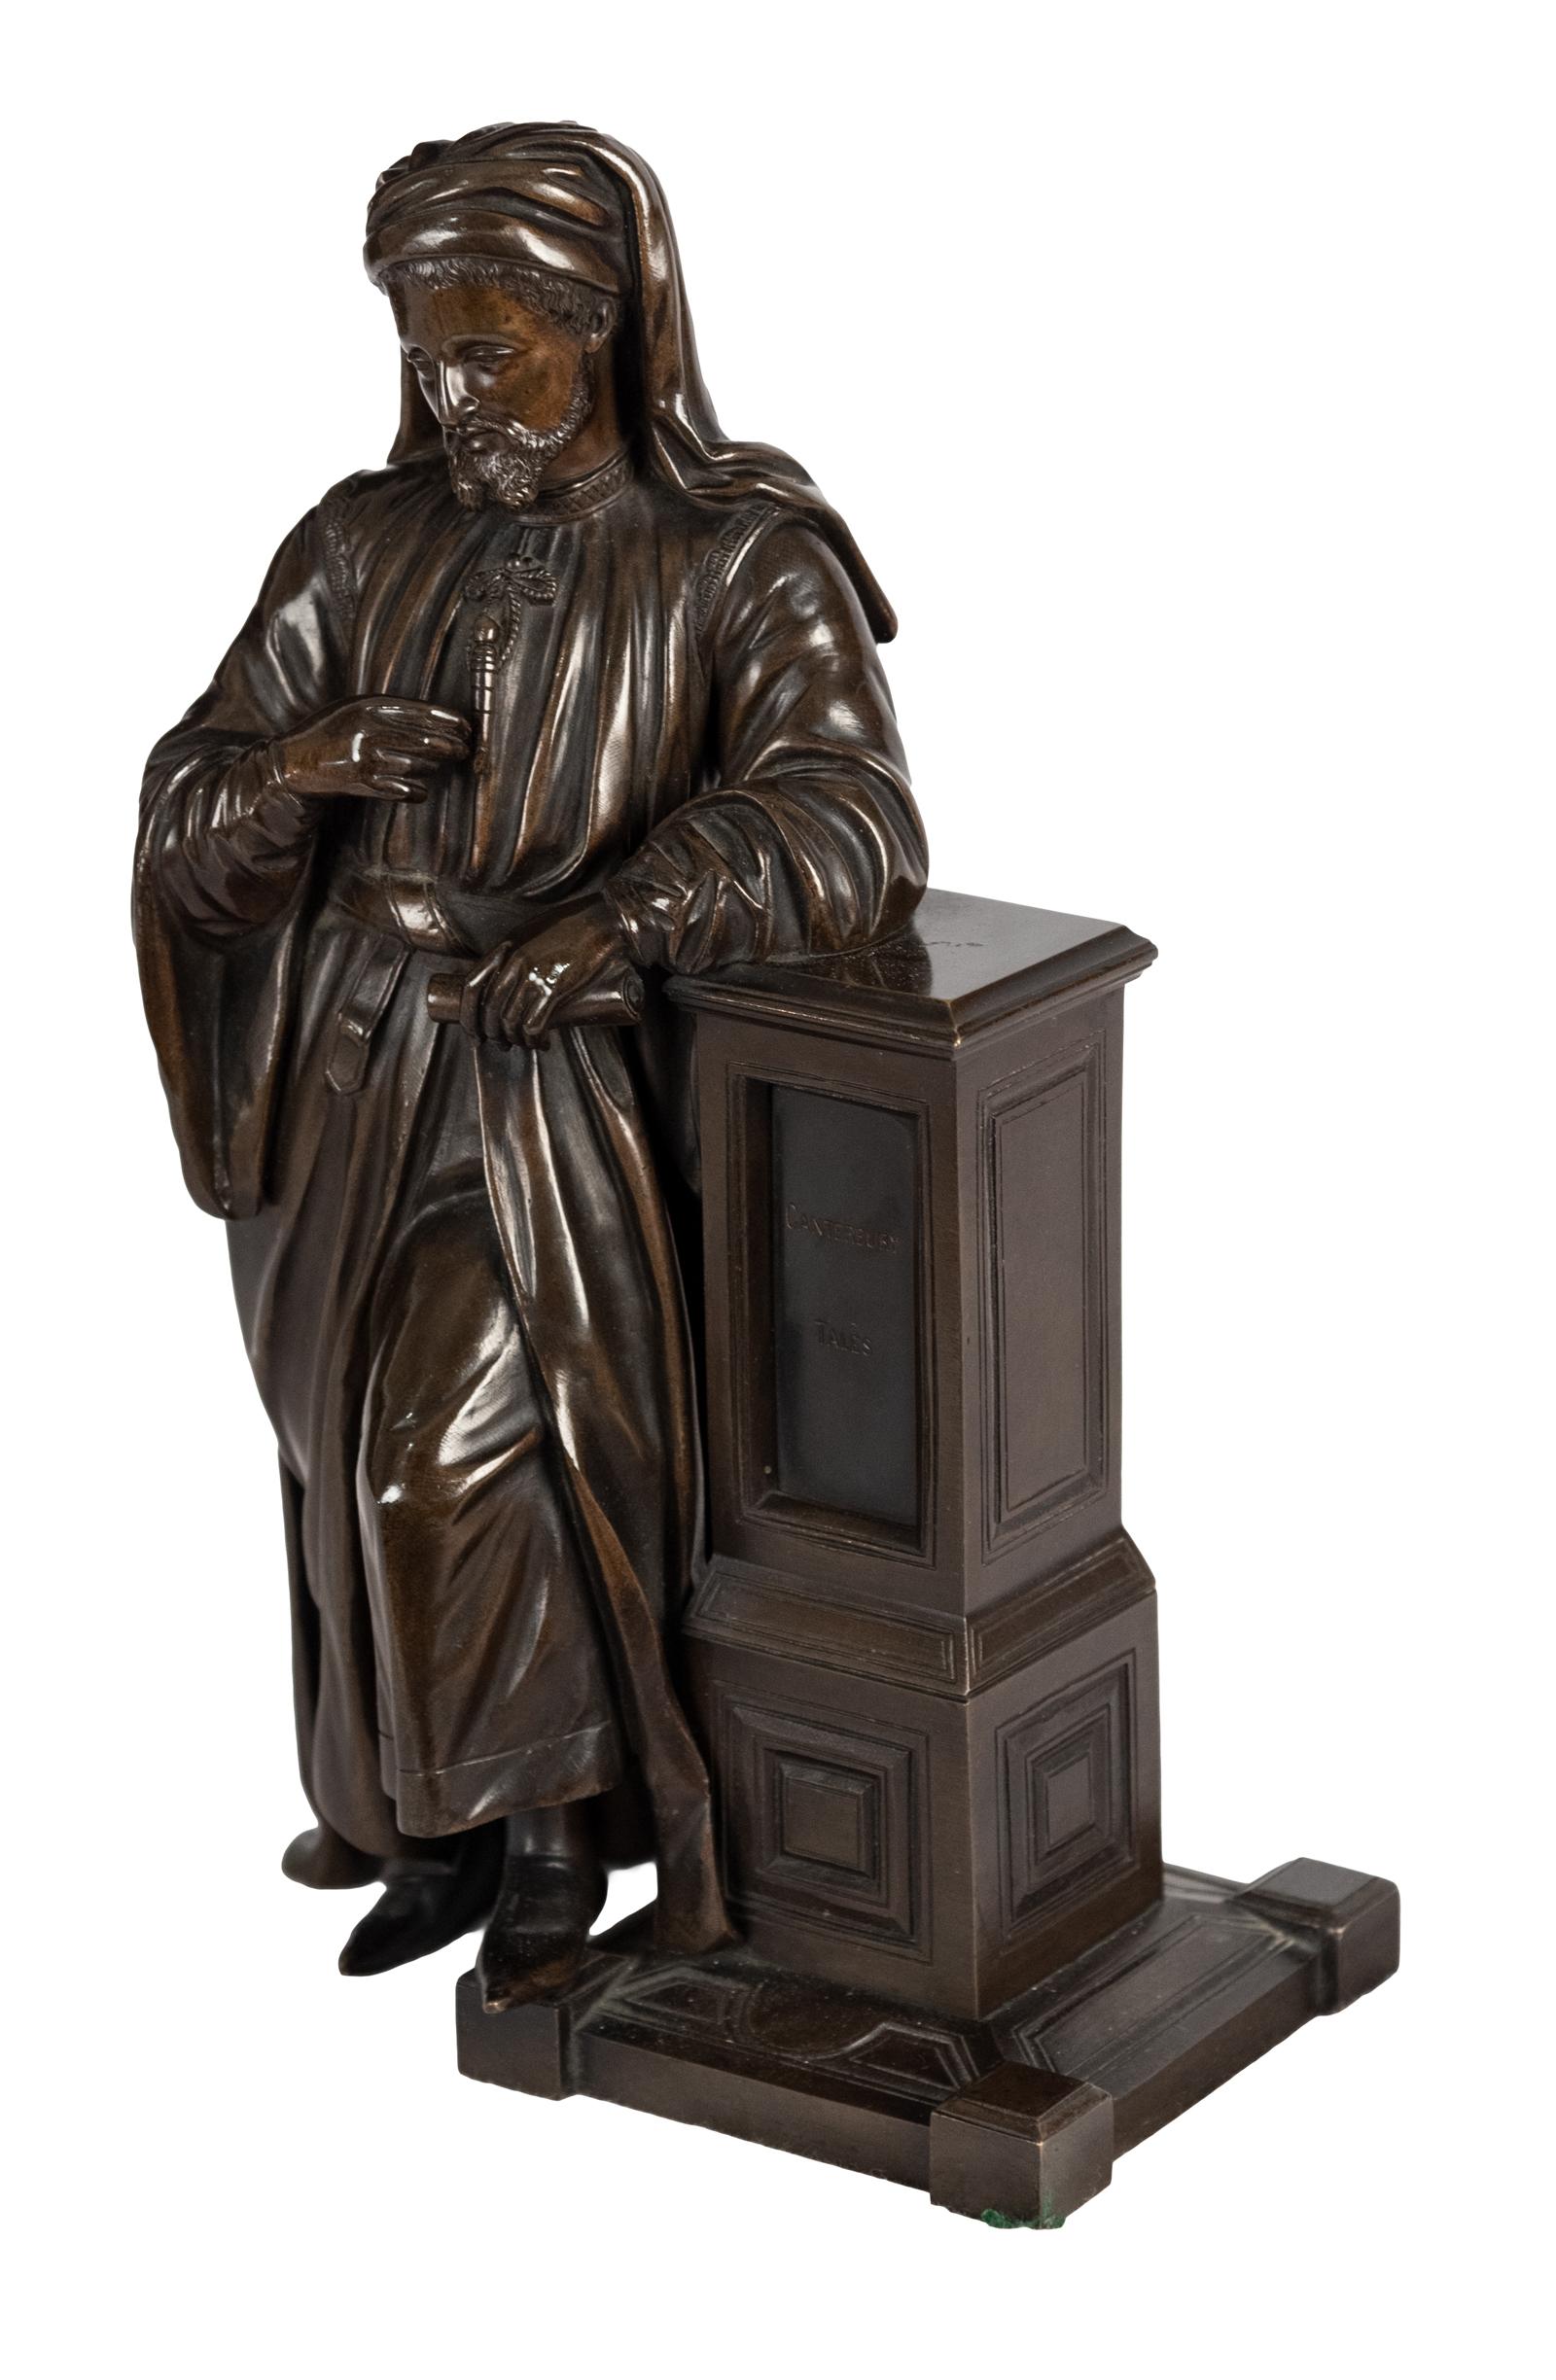 Here Chaucer, the famous English poet, is portrayed in his traditional robes and head covering, holding a copy of his seminal work Canterbury Tales while resting against a column also inscribed with the title of the book. American, late 19th